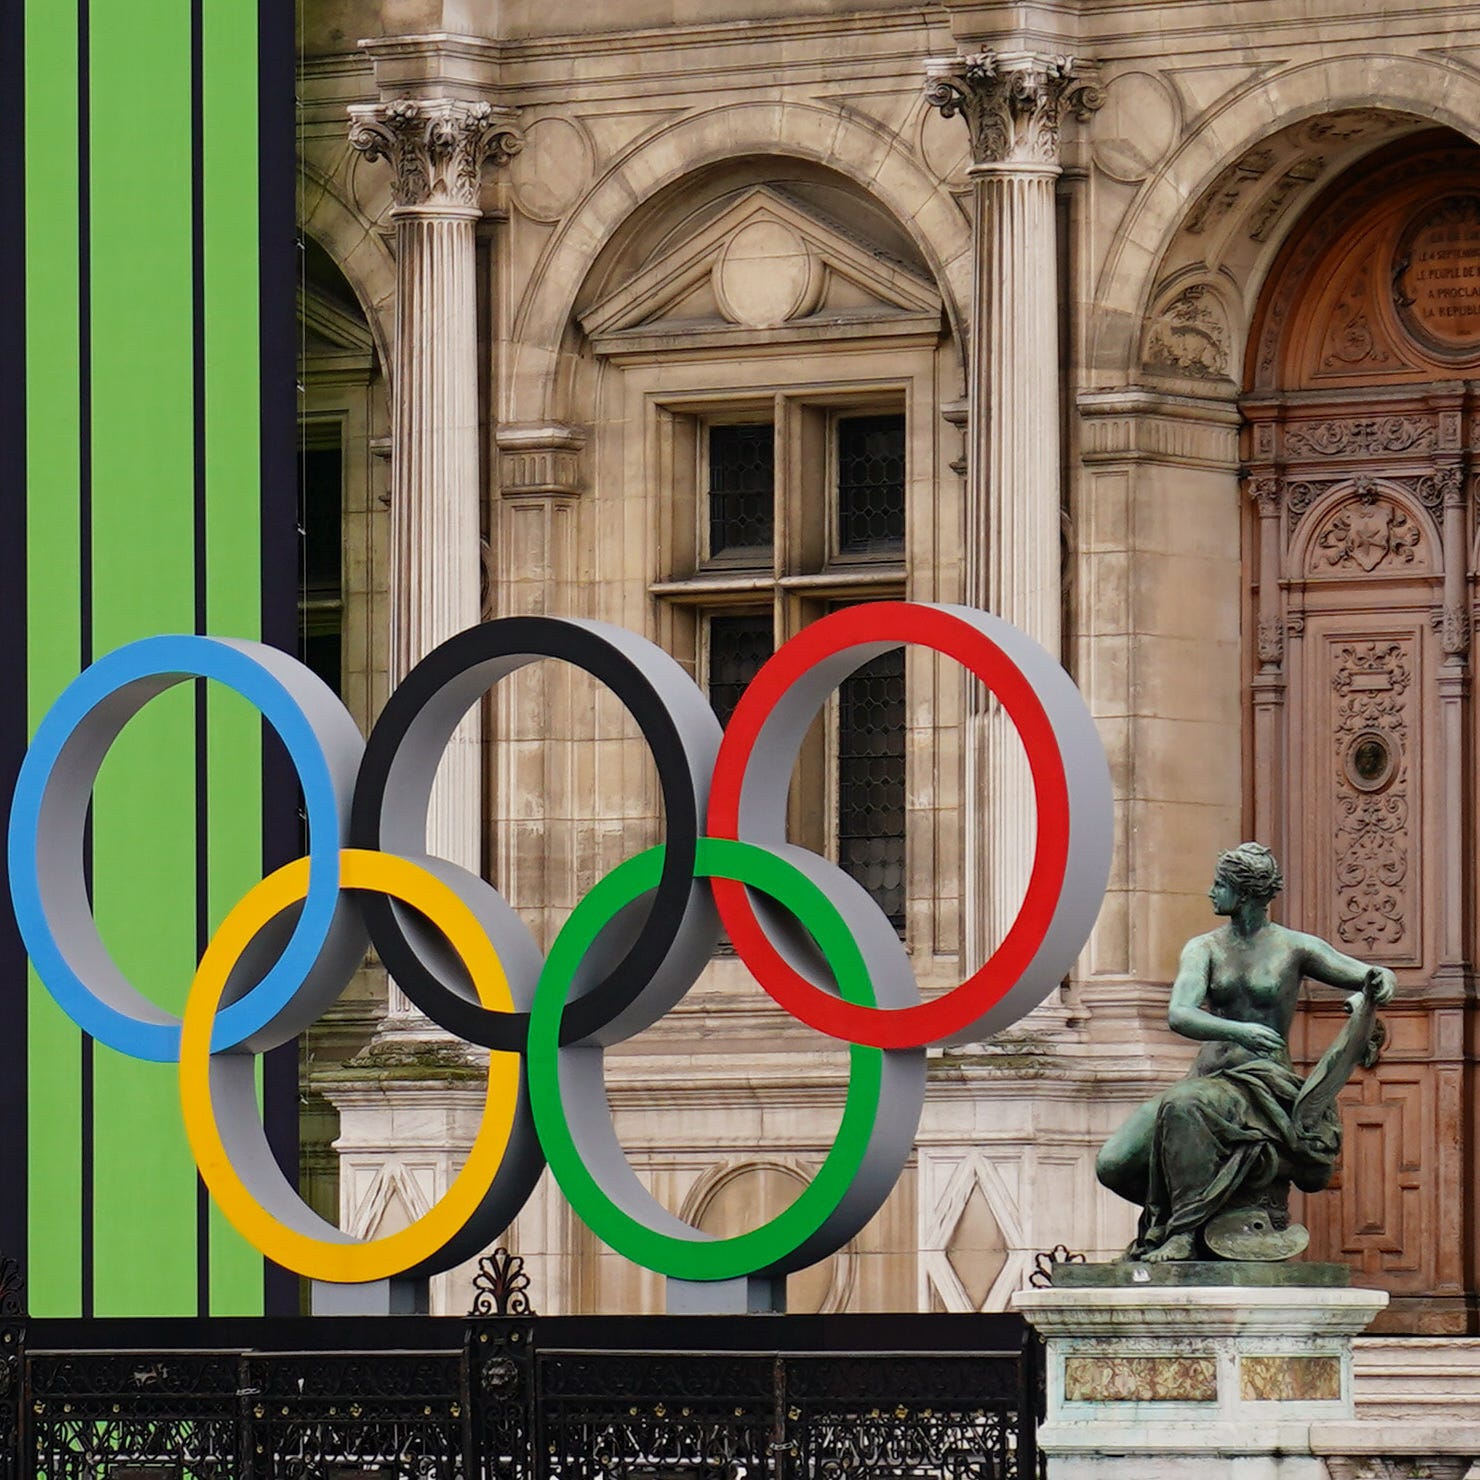 The Olympic rings are on display outside the Hotel de Ville ahead of the Paris 2024 Summer Olympic Games.